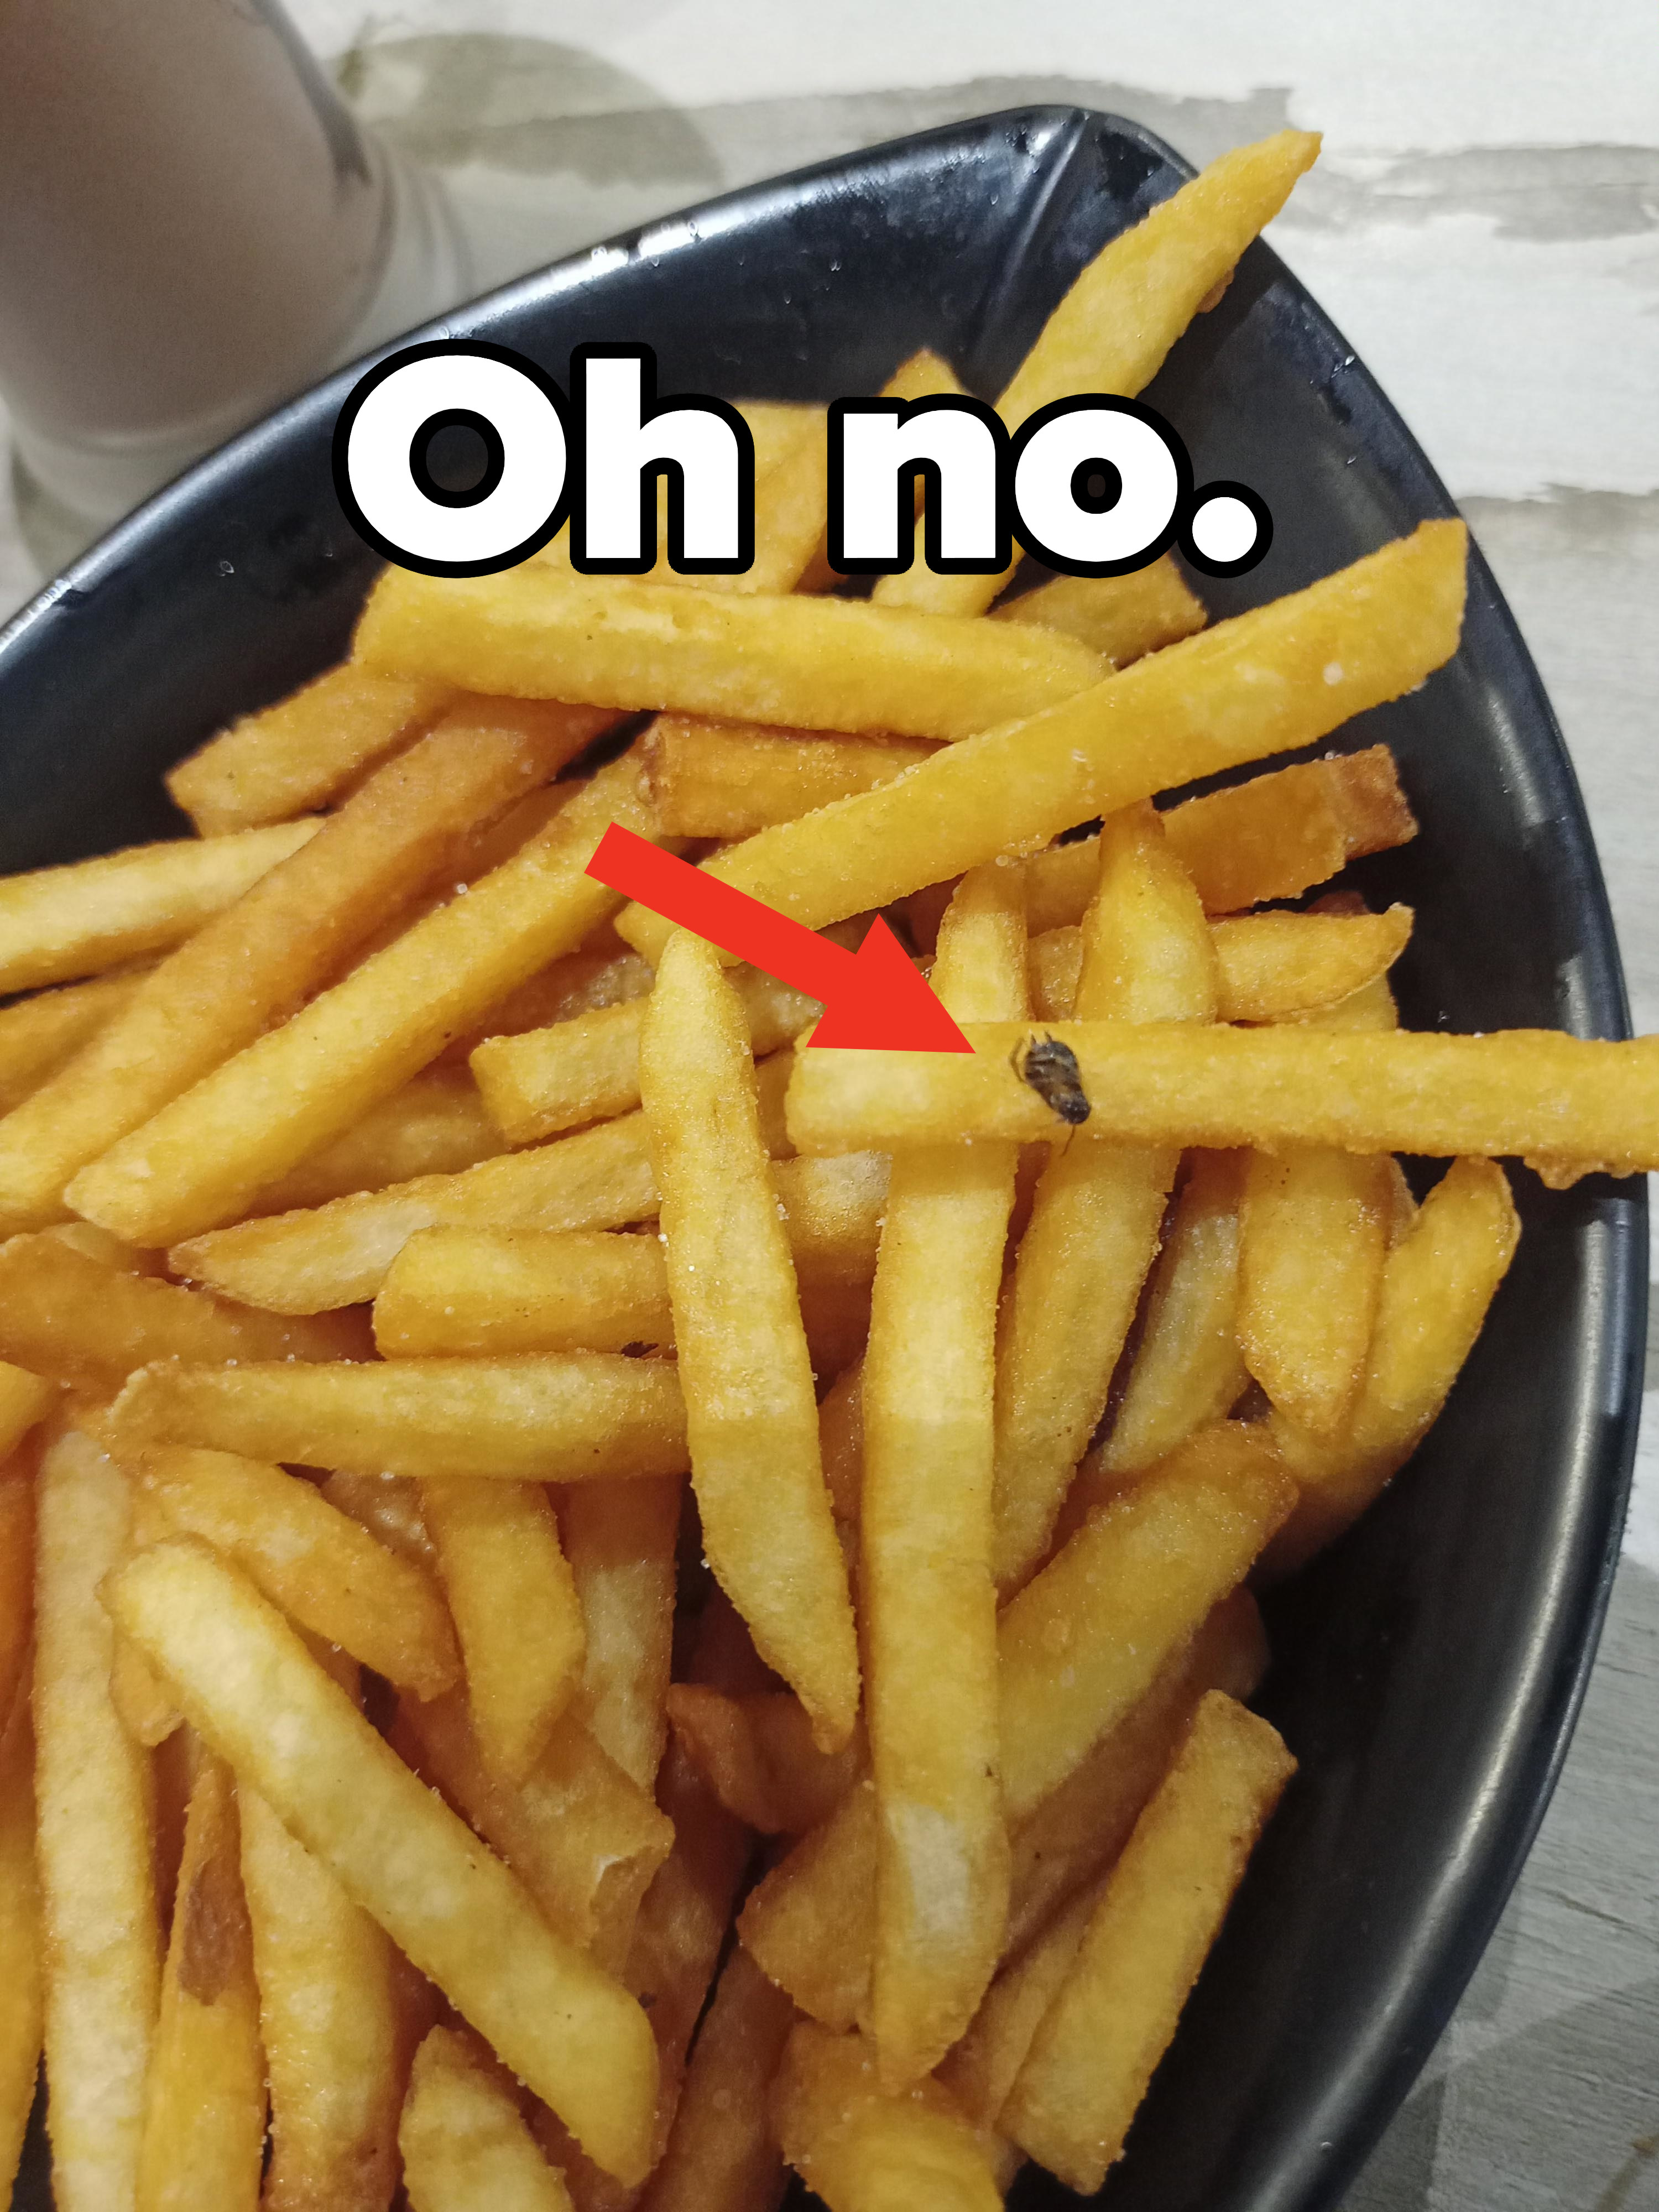 Fries in a container with a small insect on one